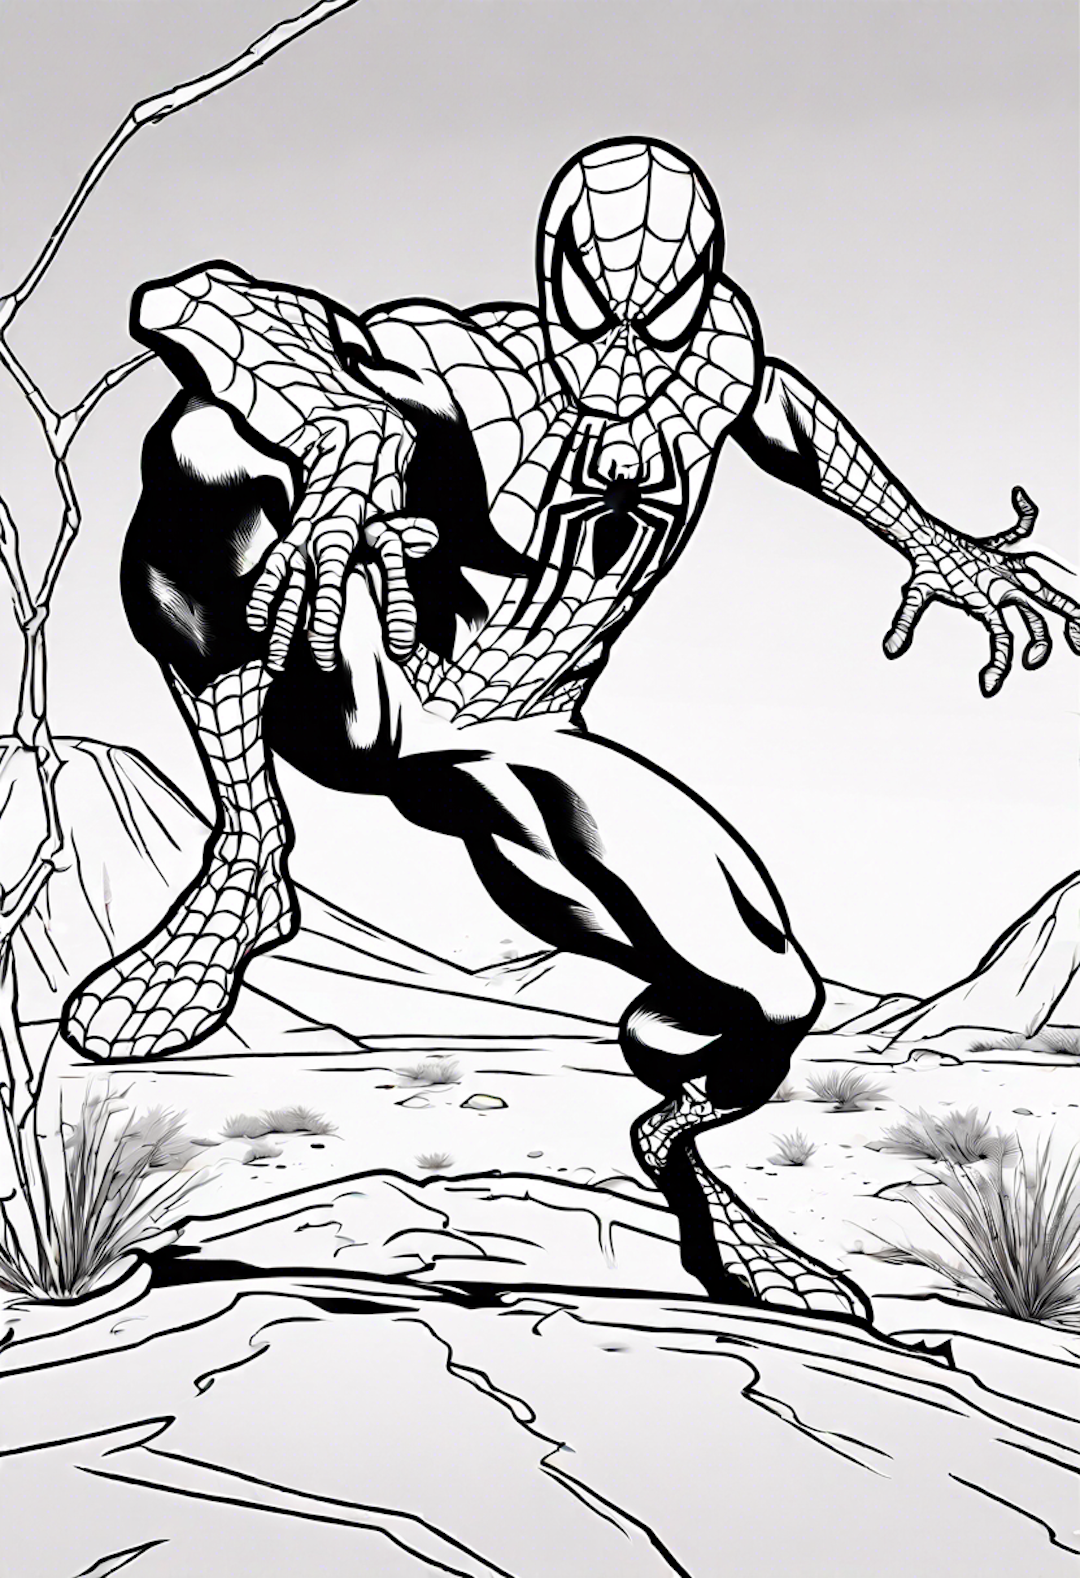 Spiderman In A Confrontation With Scorpion In A Desert